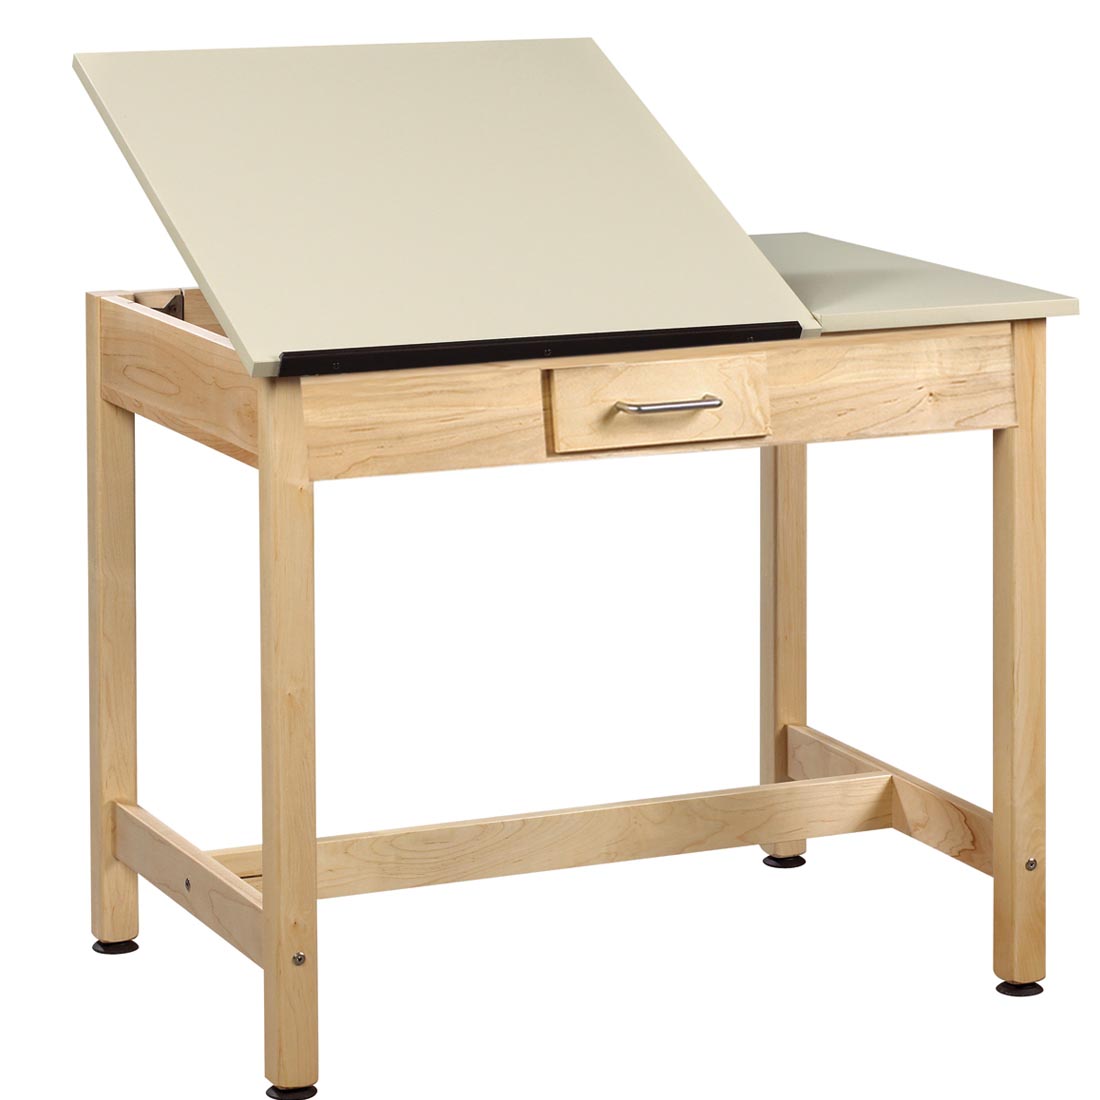 Art & Drafting Table with desk top in slanted position